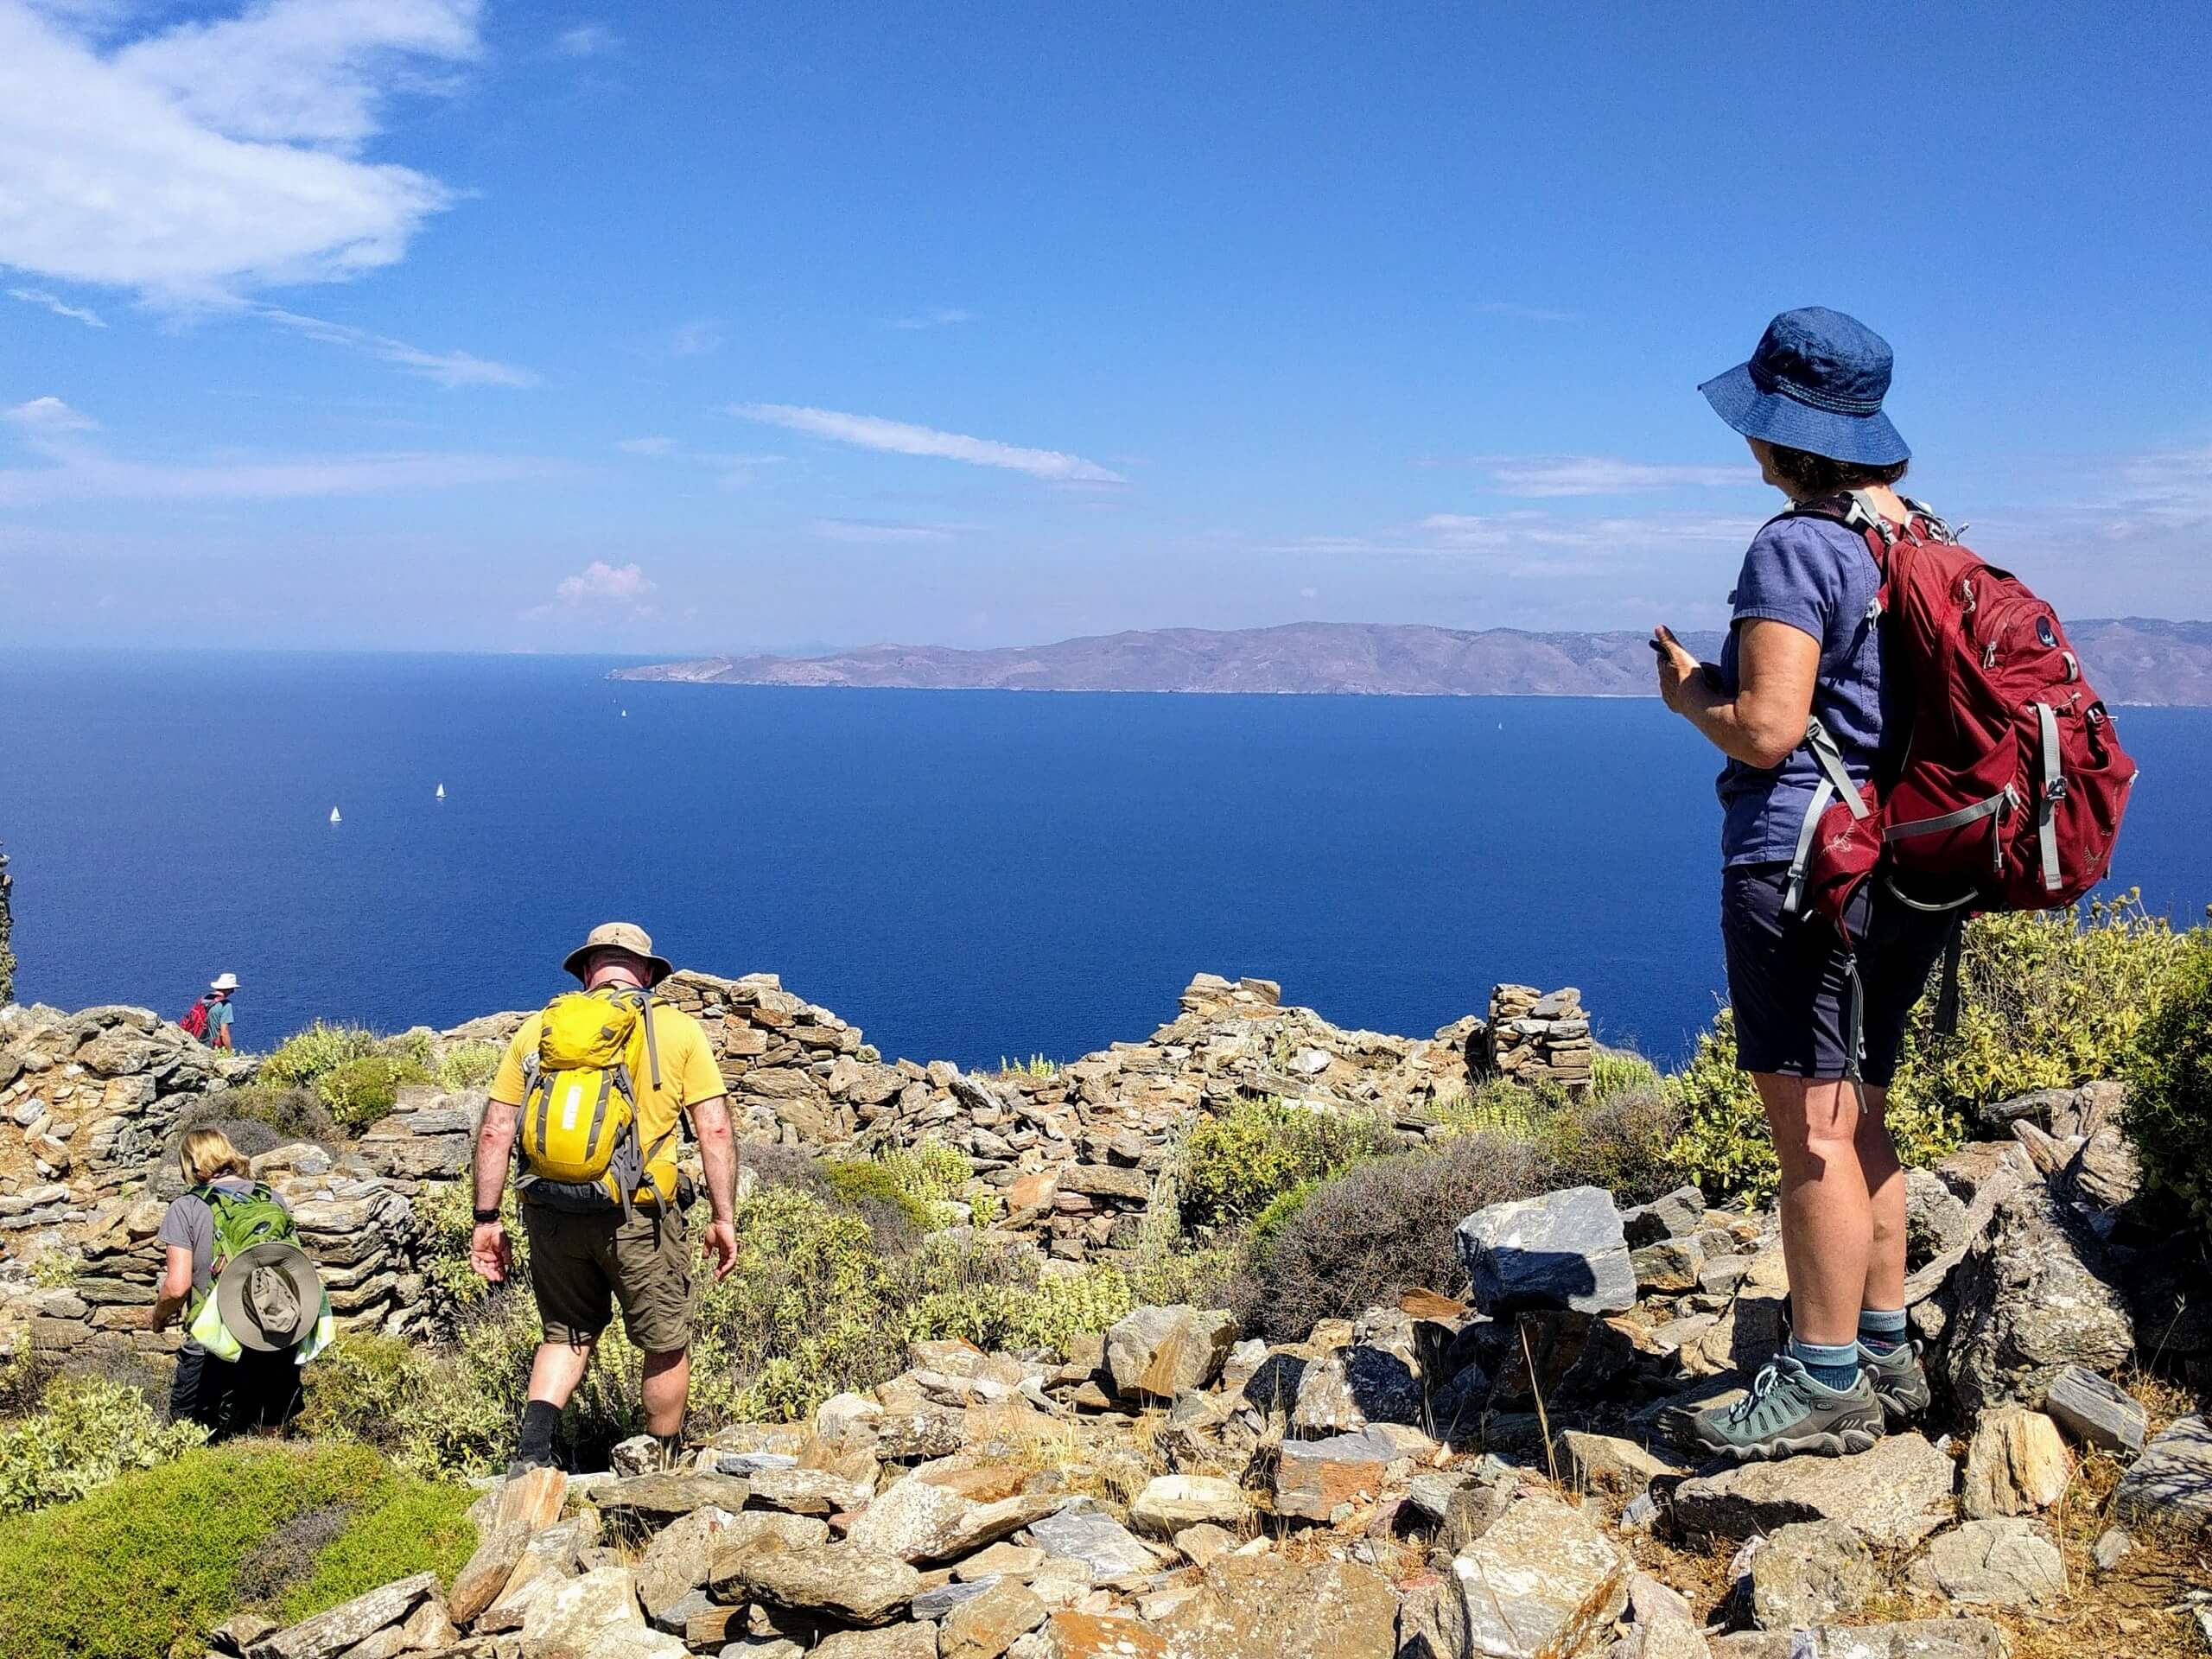 Hikers enjoying the views from the top of Kythnos Island